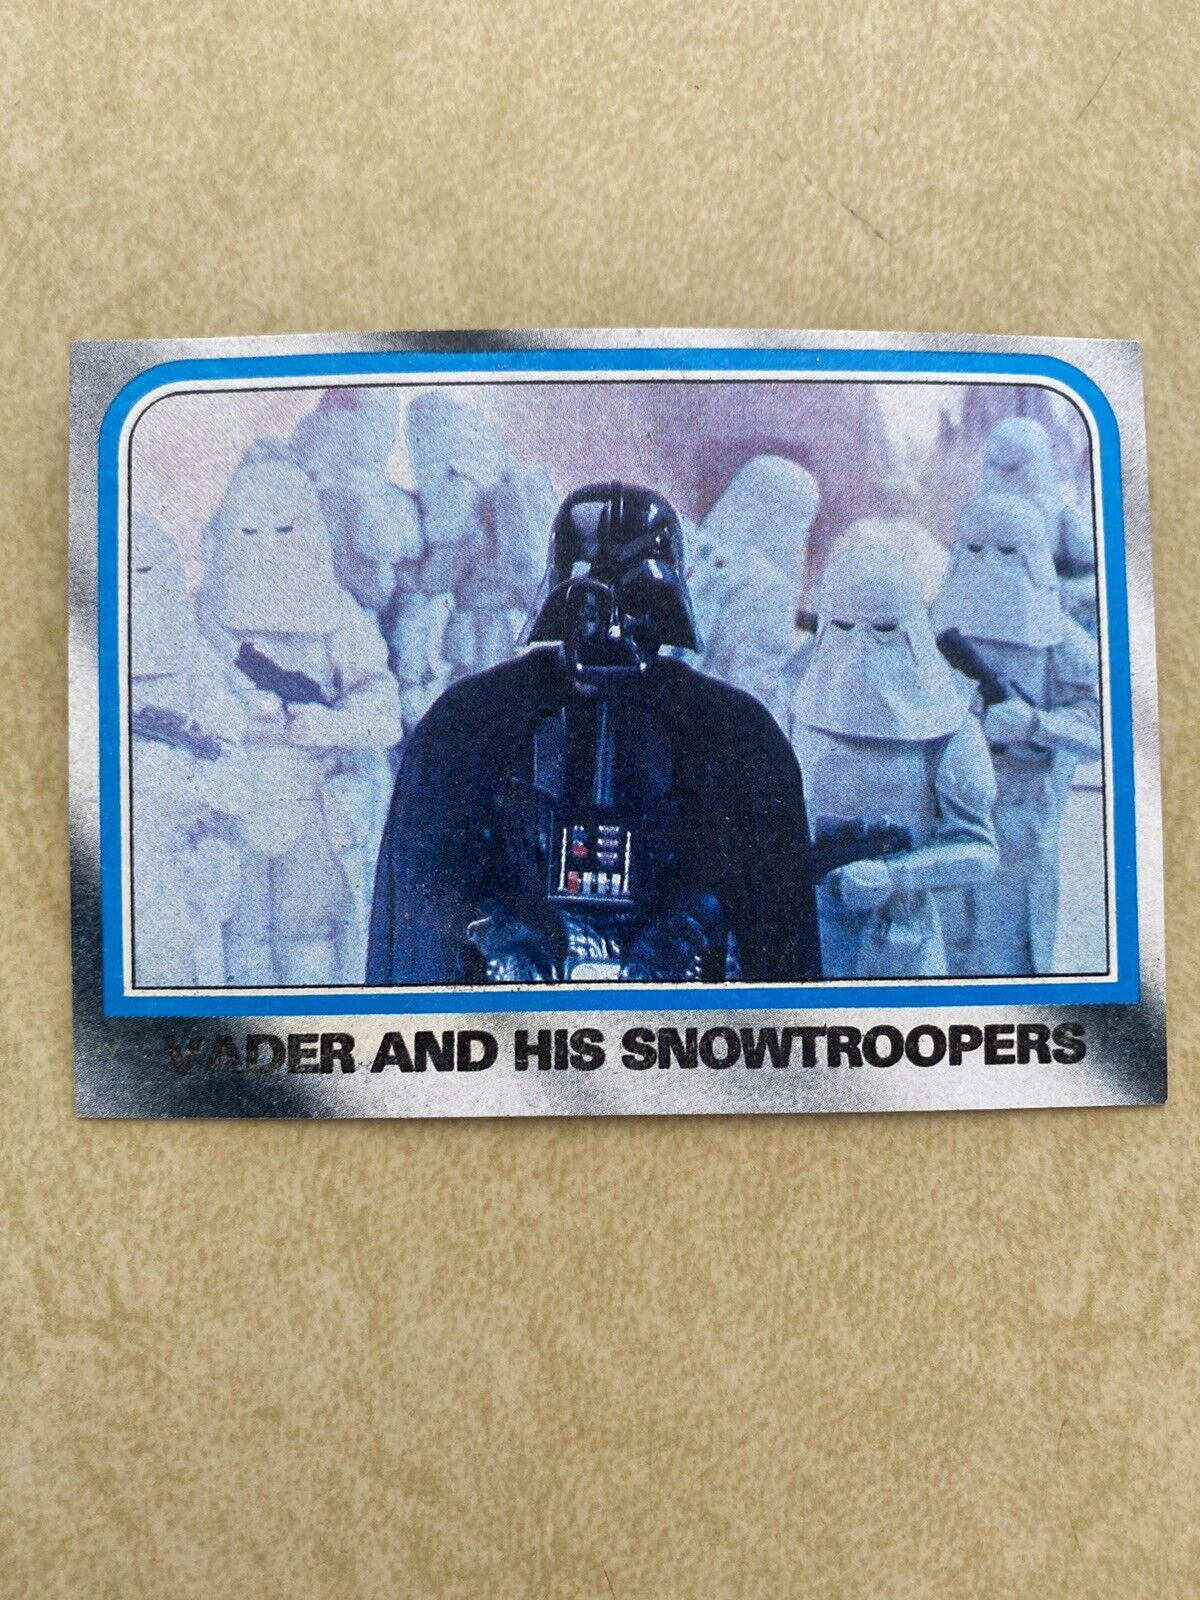 1980 Topps The Empire Strikes Back -Vader and His Snowtroopers #165 -CENTERED